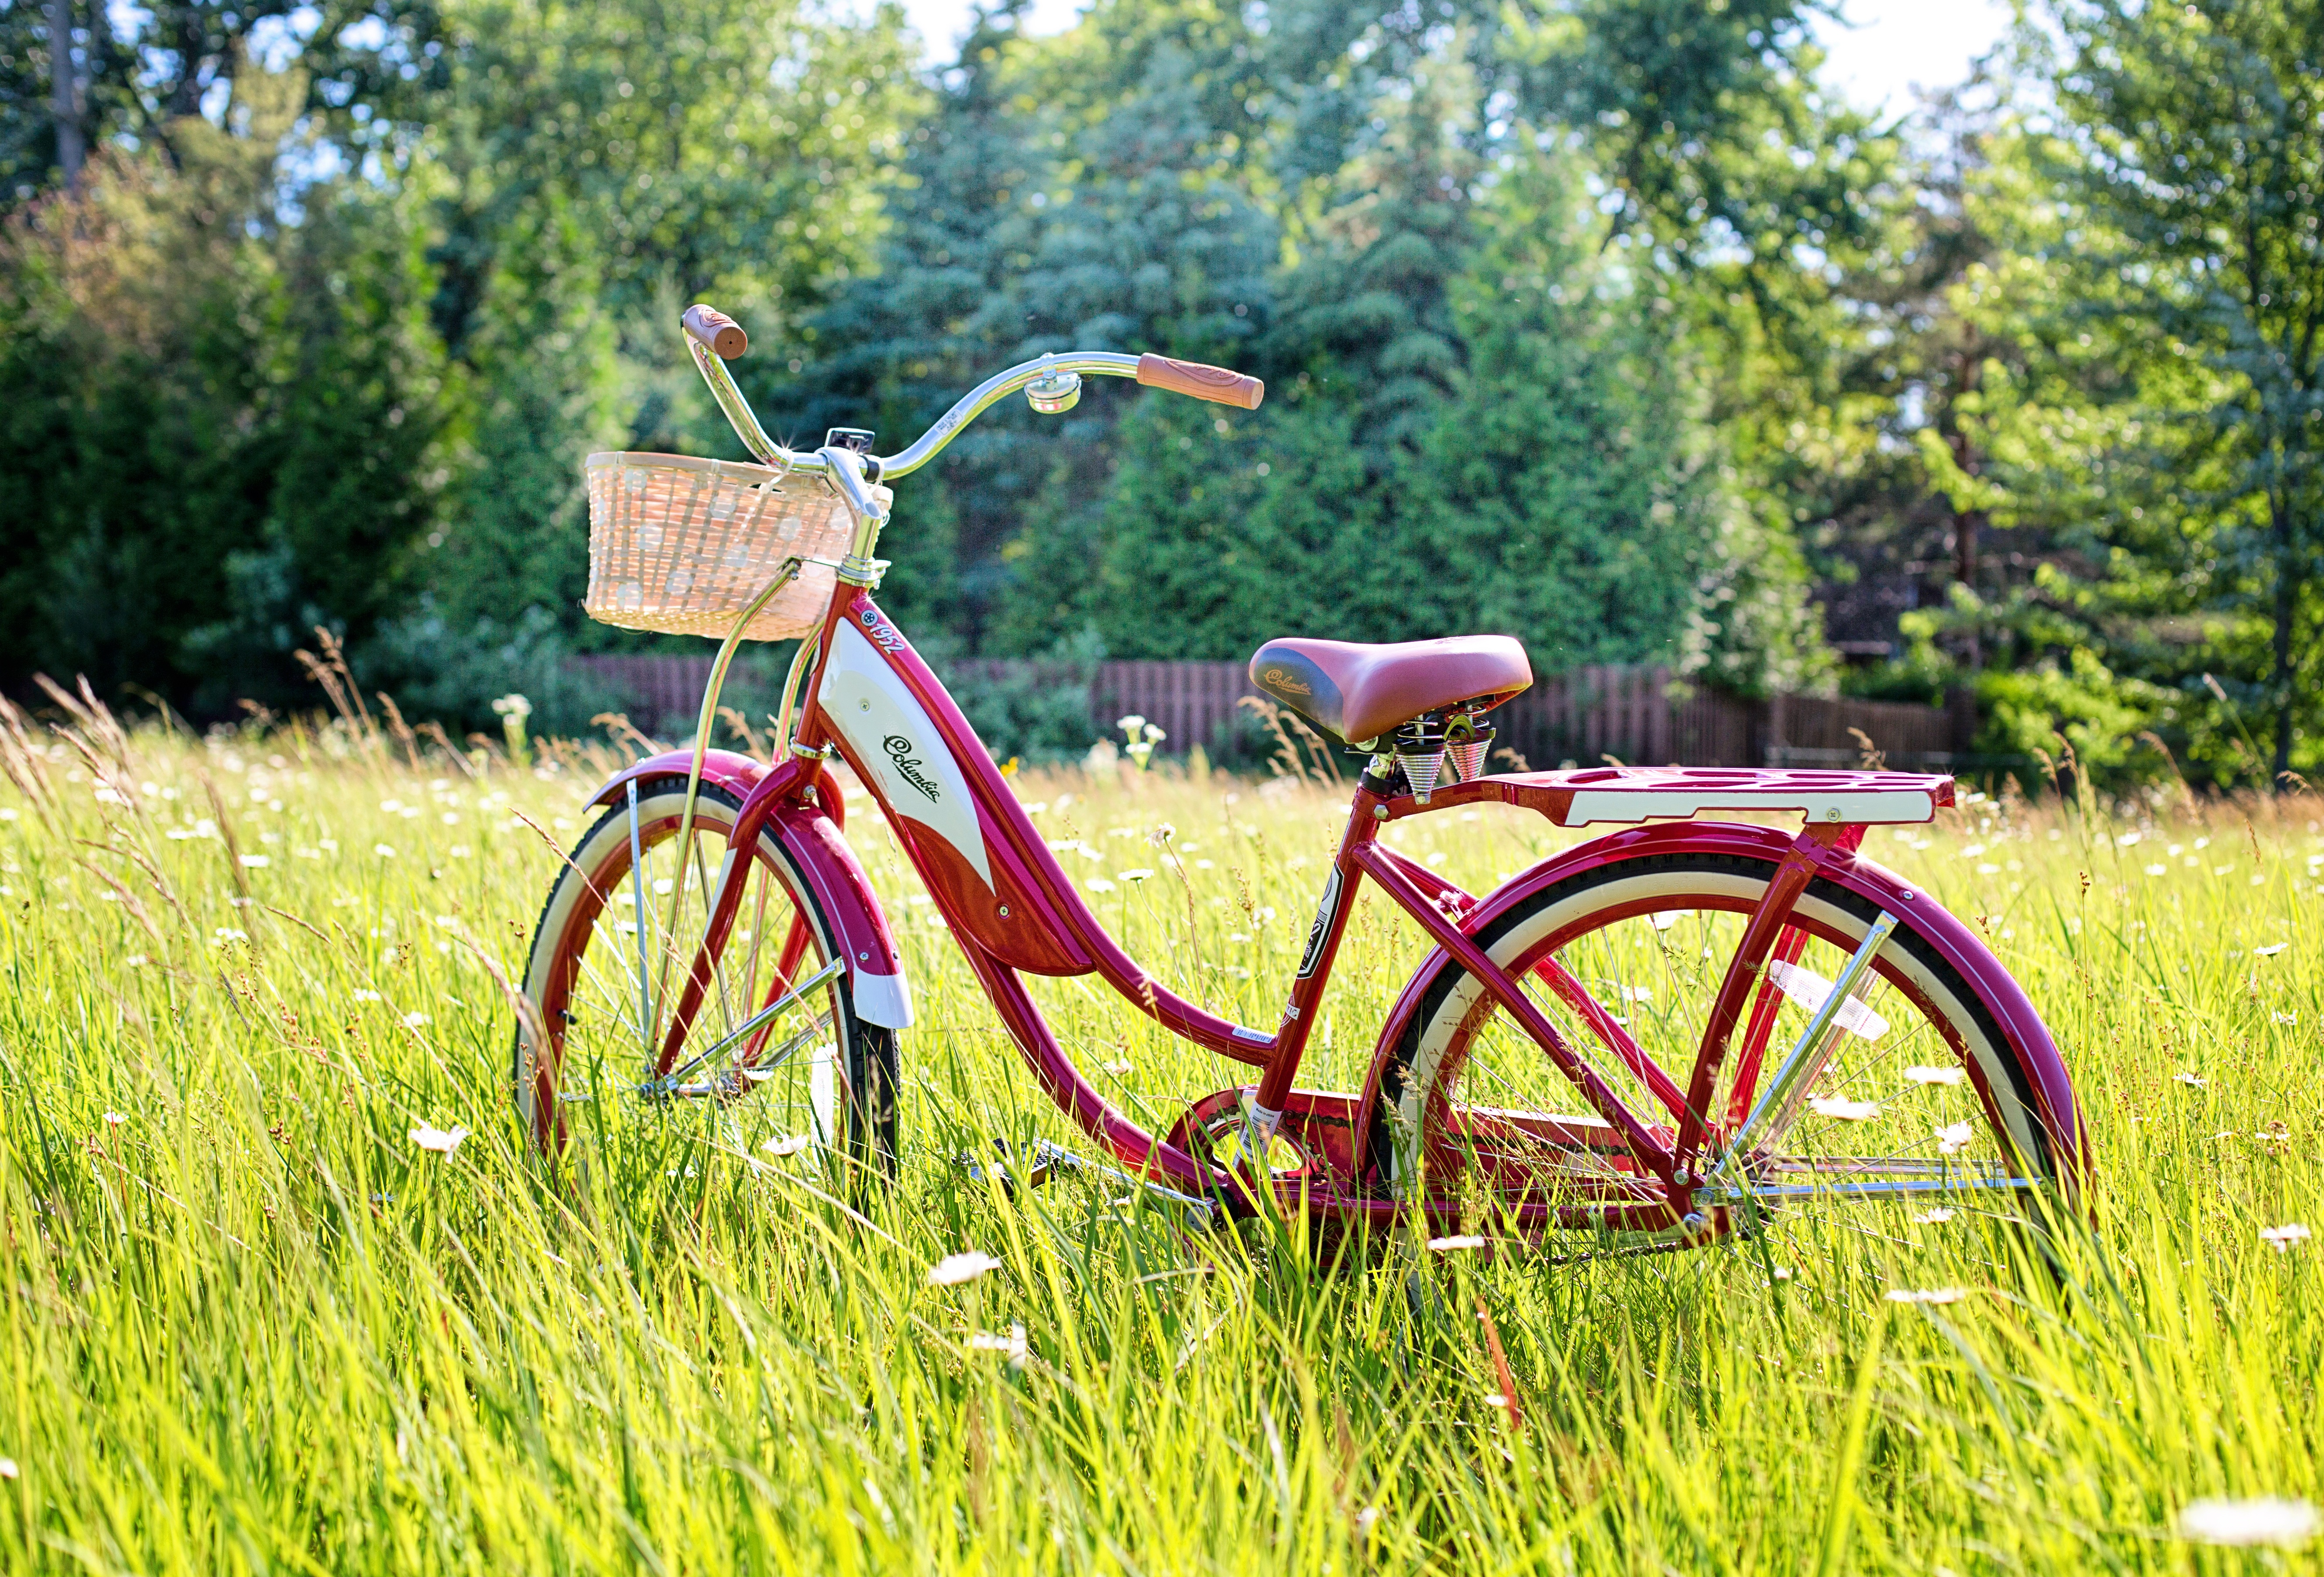 wallpapers summer, miscellanea, miscellaneous, vintage, sunlight, bicycle